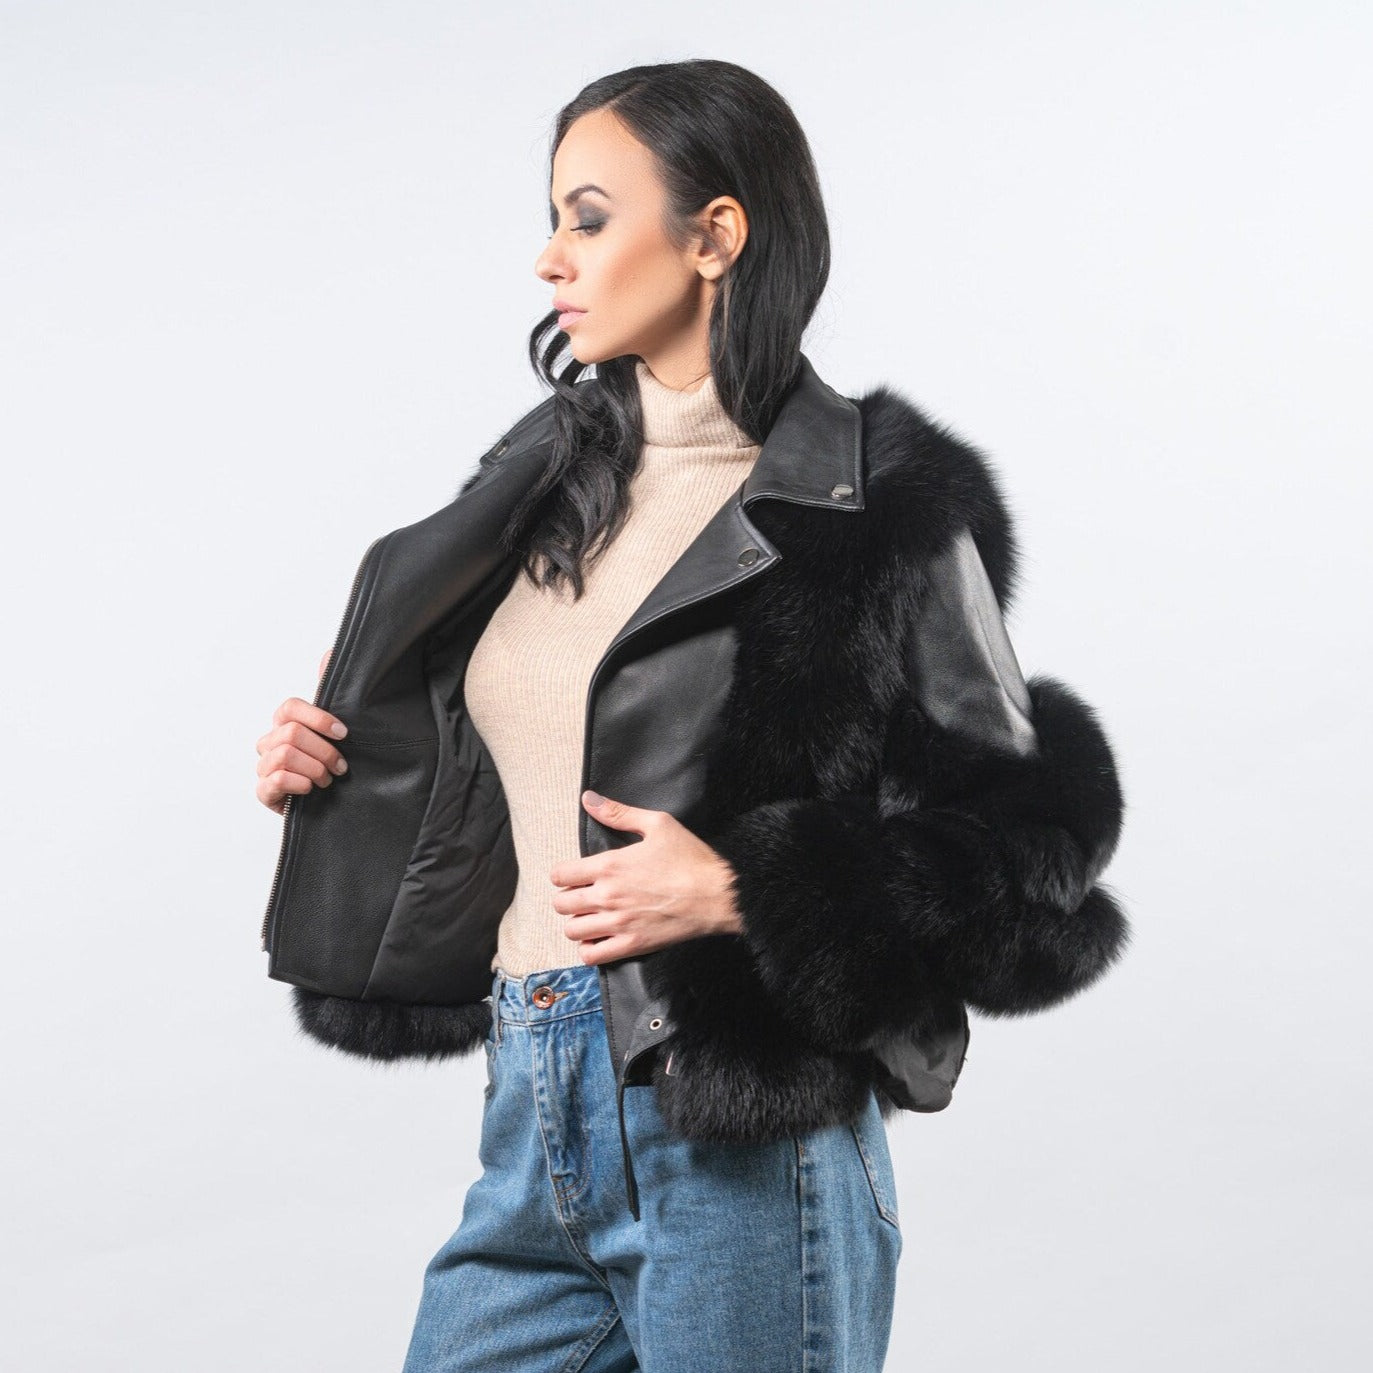 New Winter Womens Real Fur Warm Jackets For Women MMK Natural Raccoon  Leather Warm Jackets For Women From Dou02, $155.76 | DHgate.Com